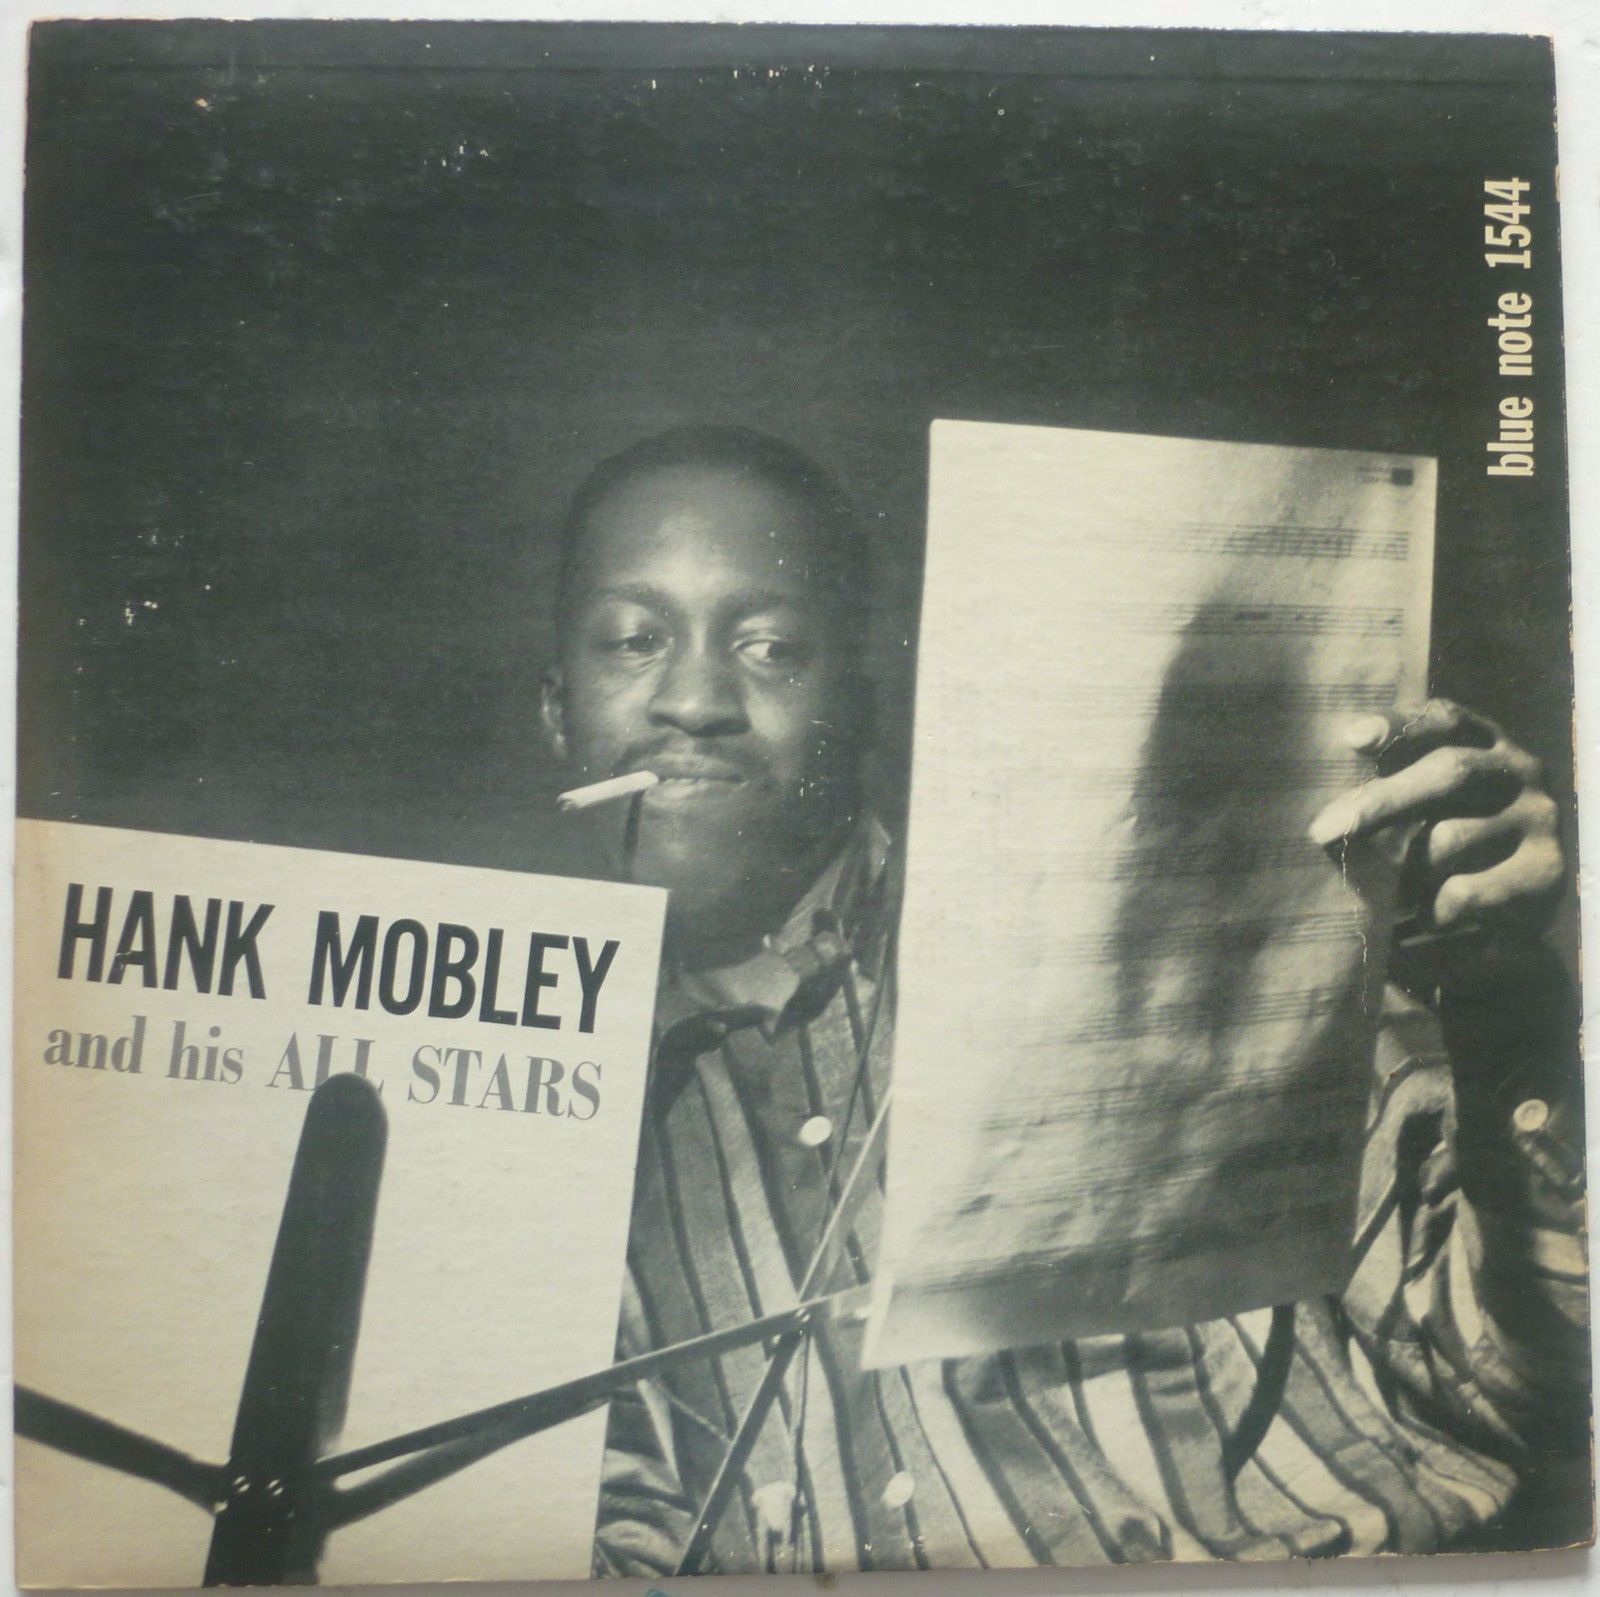 HANK MOBLEY  * BLP 1544  * ED 1 BLUE NOTE * 47 west RVG EAR * EX / NM * TOP